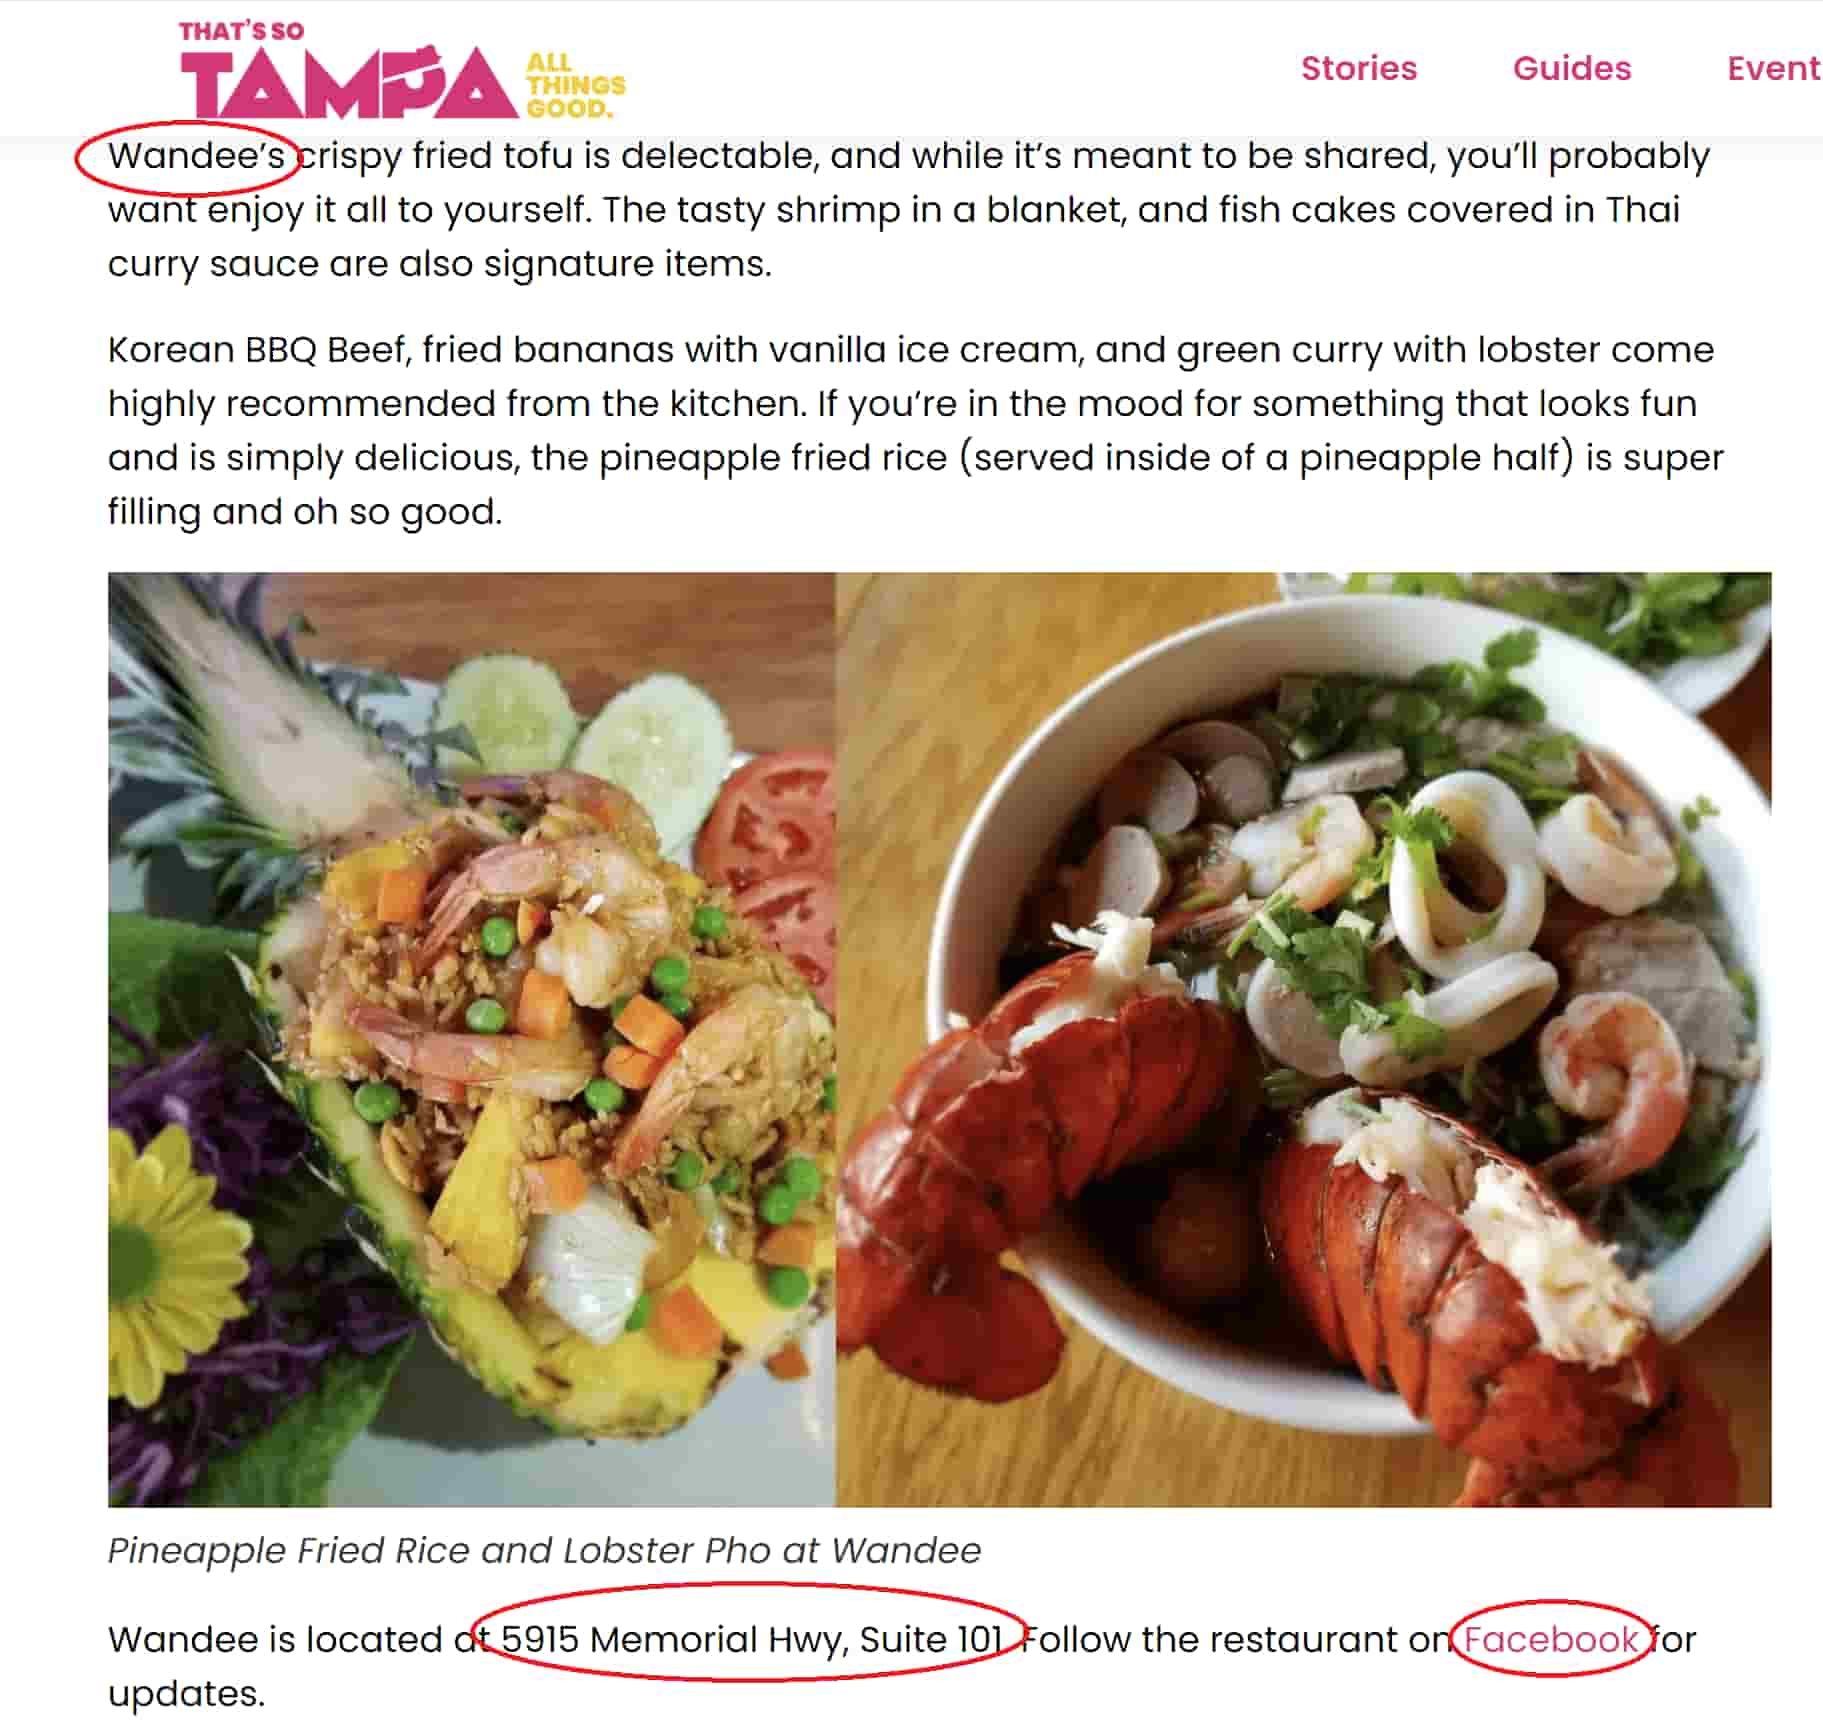 Local citations in articles about restaurants in Tampa